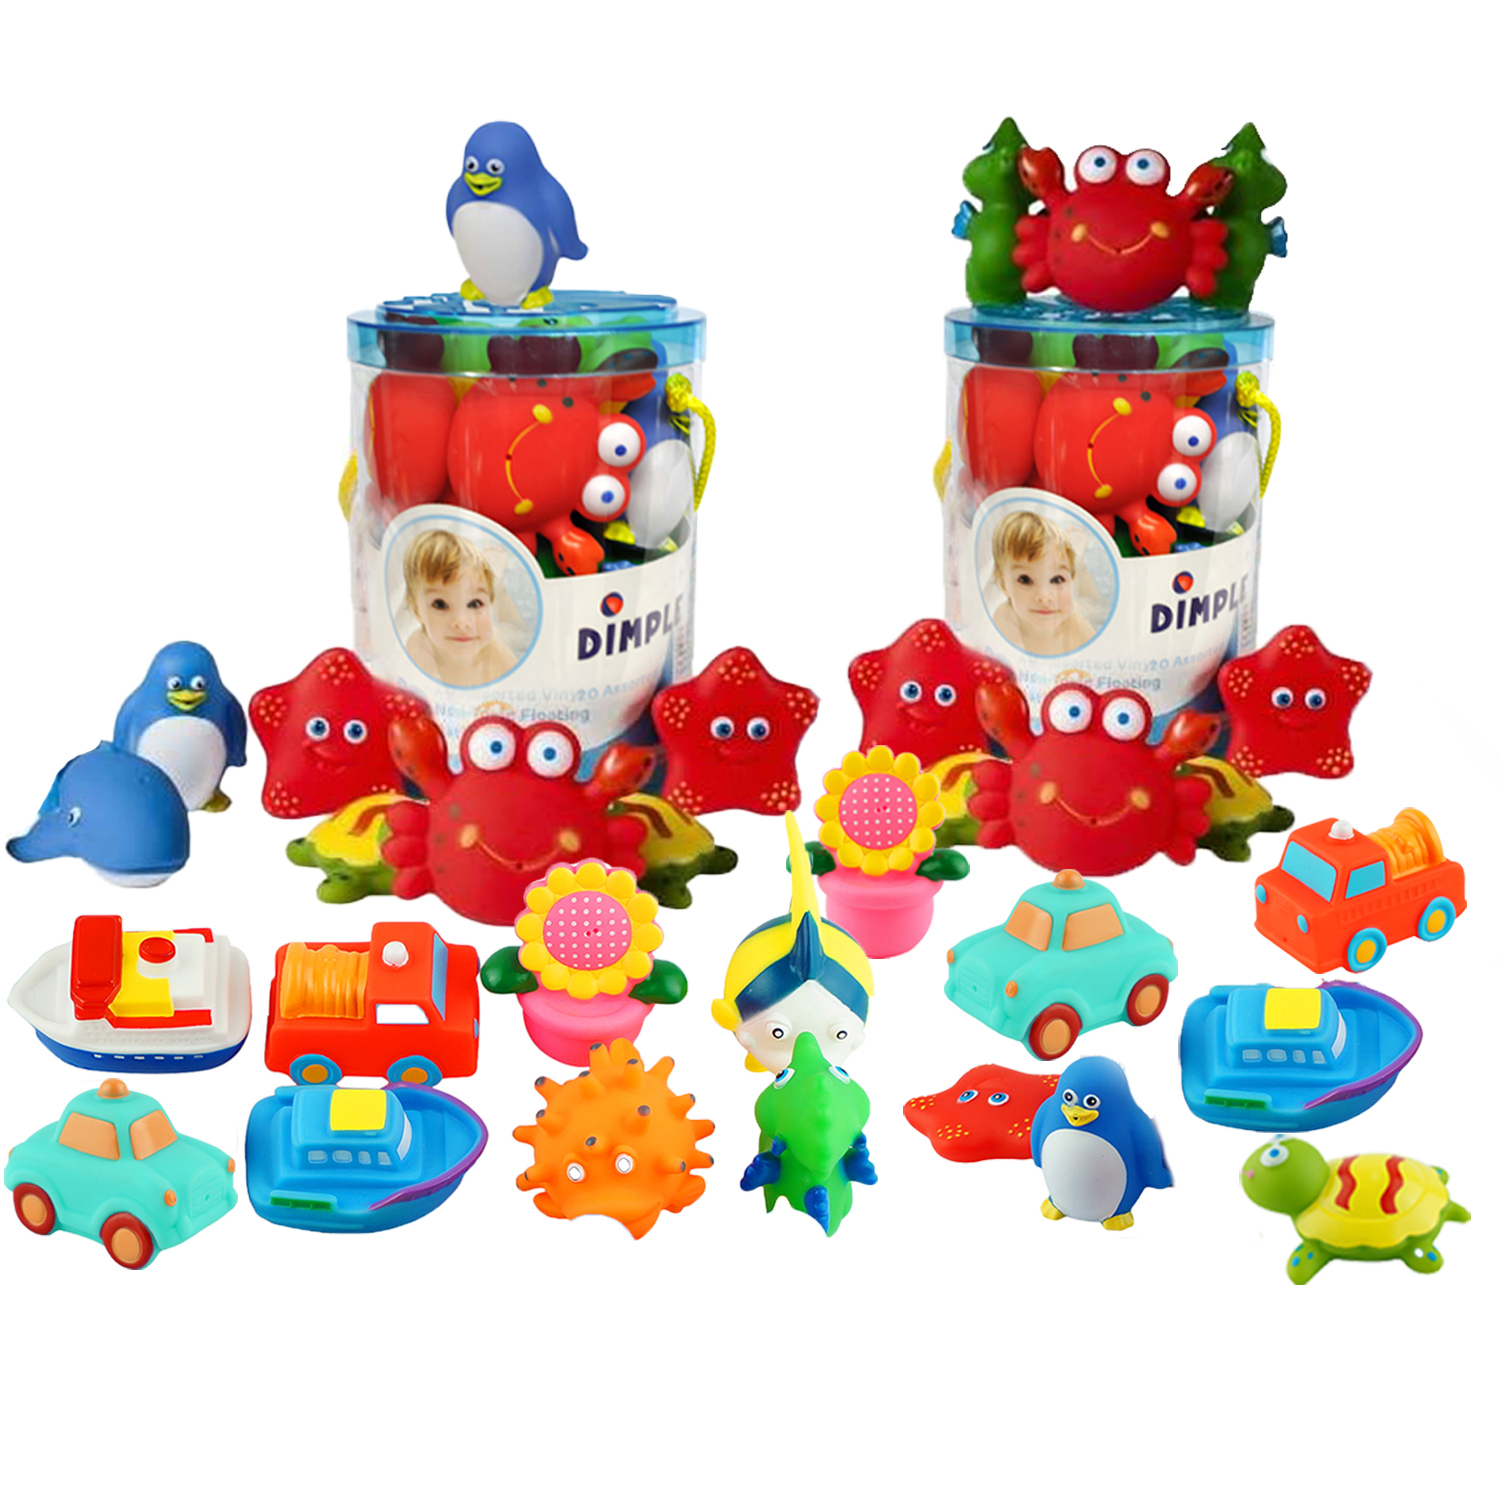 Dimple Set Of 40 Floating Bath Toys With 40 Different Sea Animals, Vehicles And Shapes, Squirter Toys For Boys And Girls, Tons Of Fun!